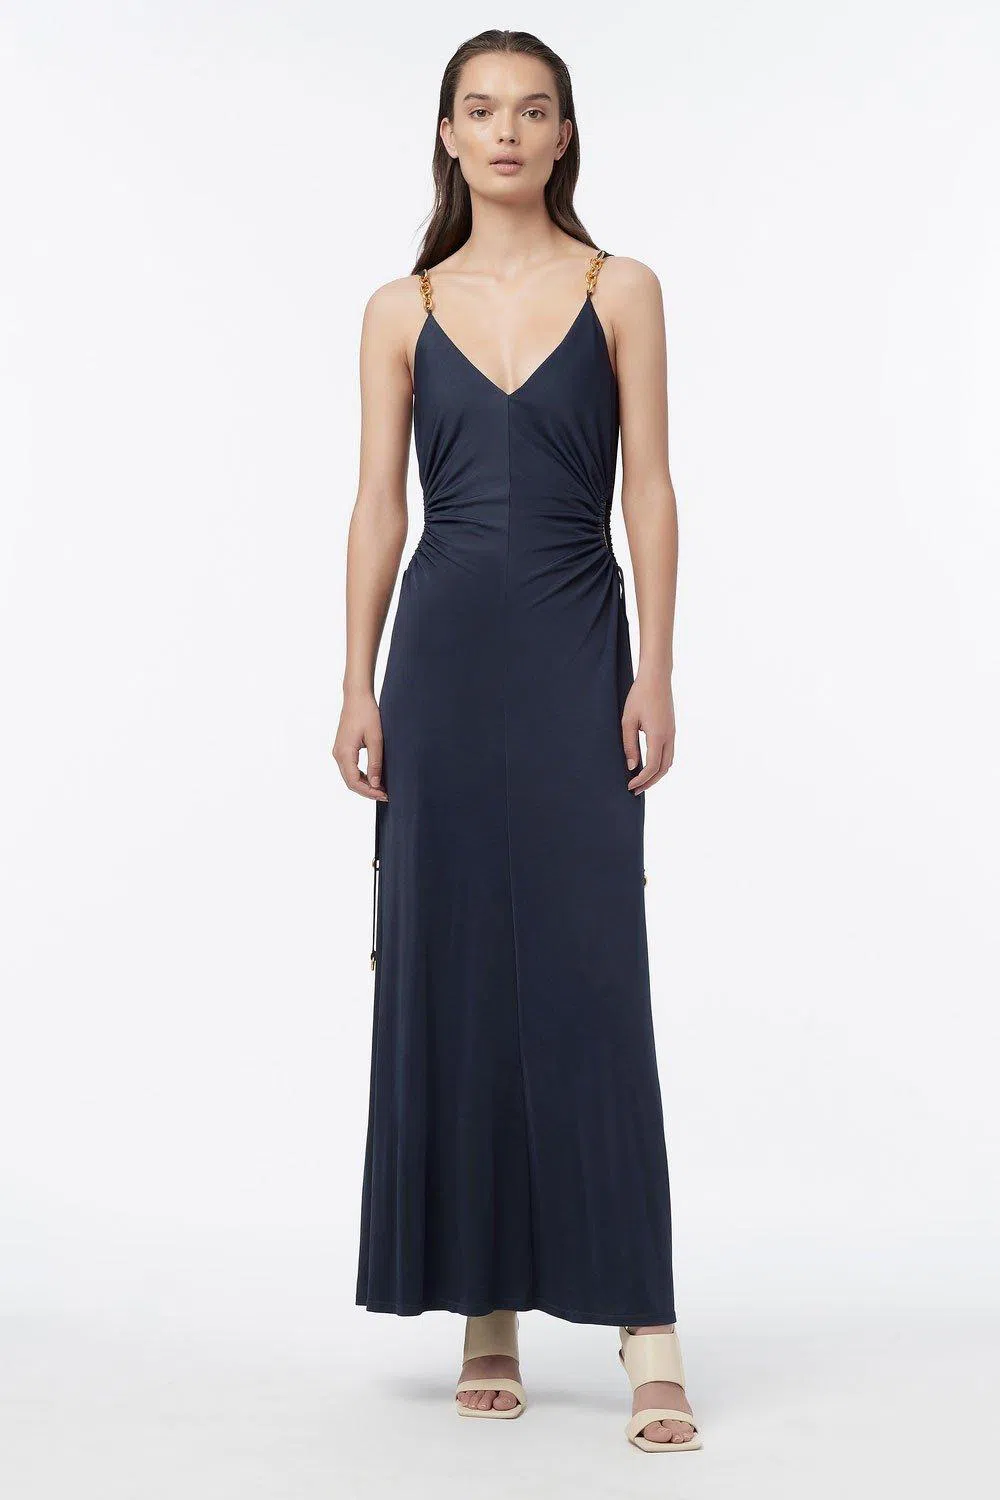 Manning Cartell Tuning in Chain Dress - Navy